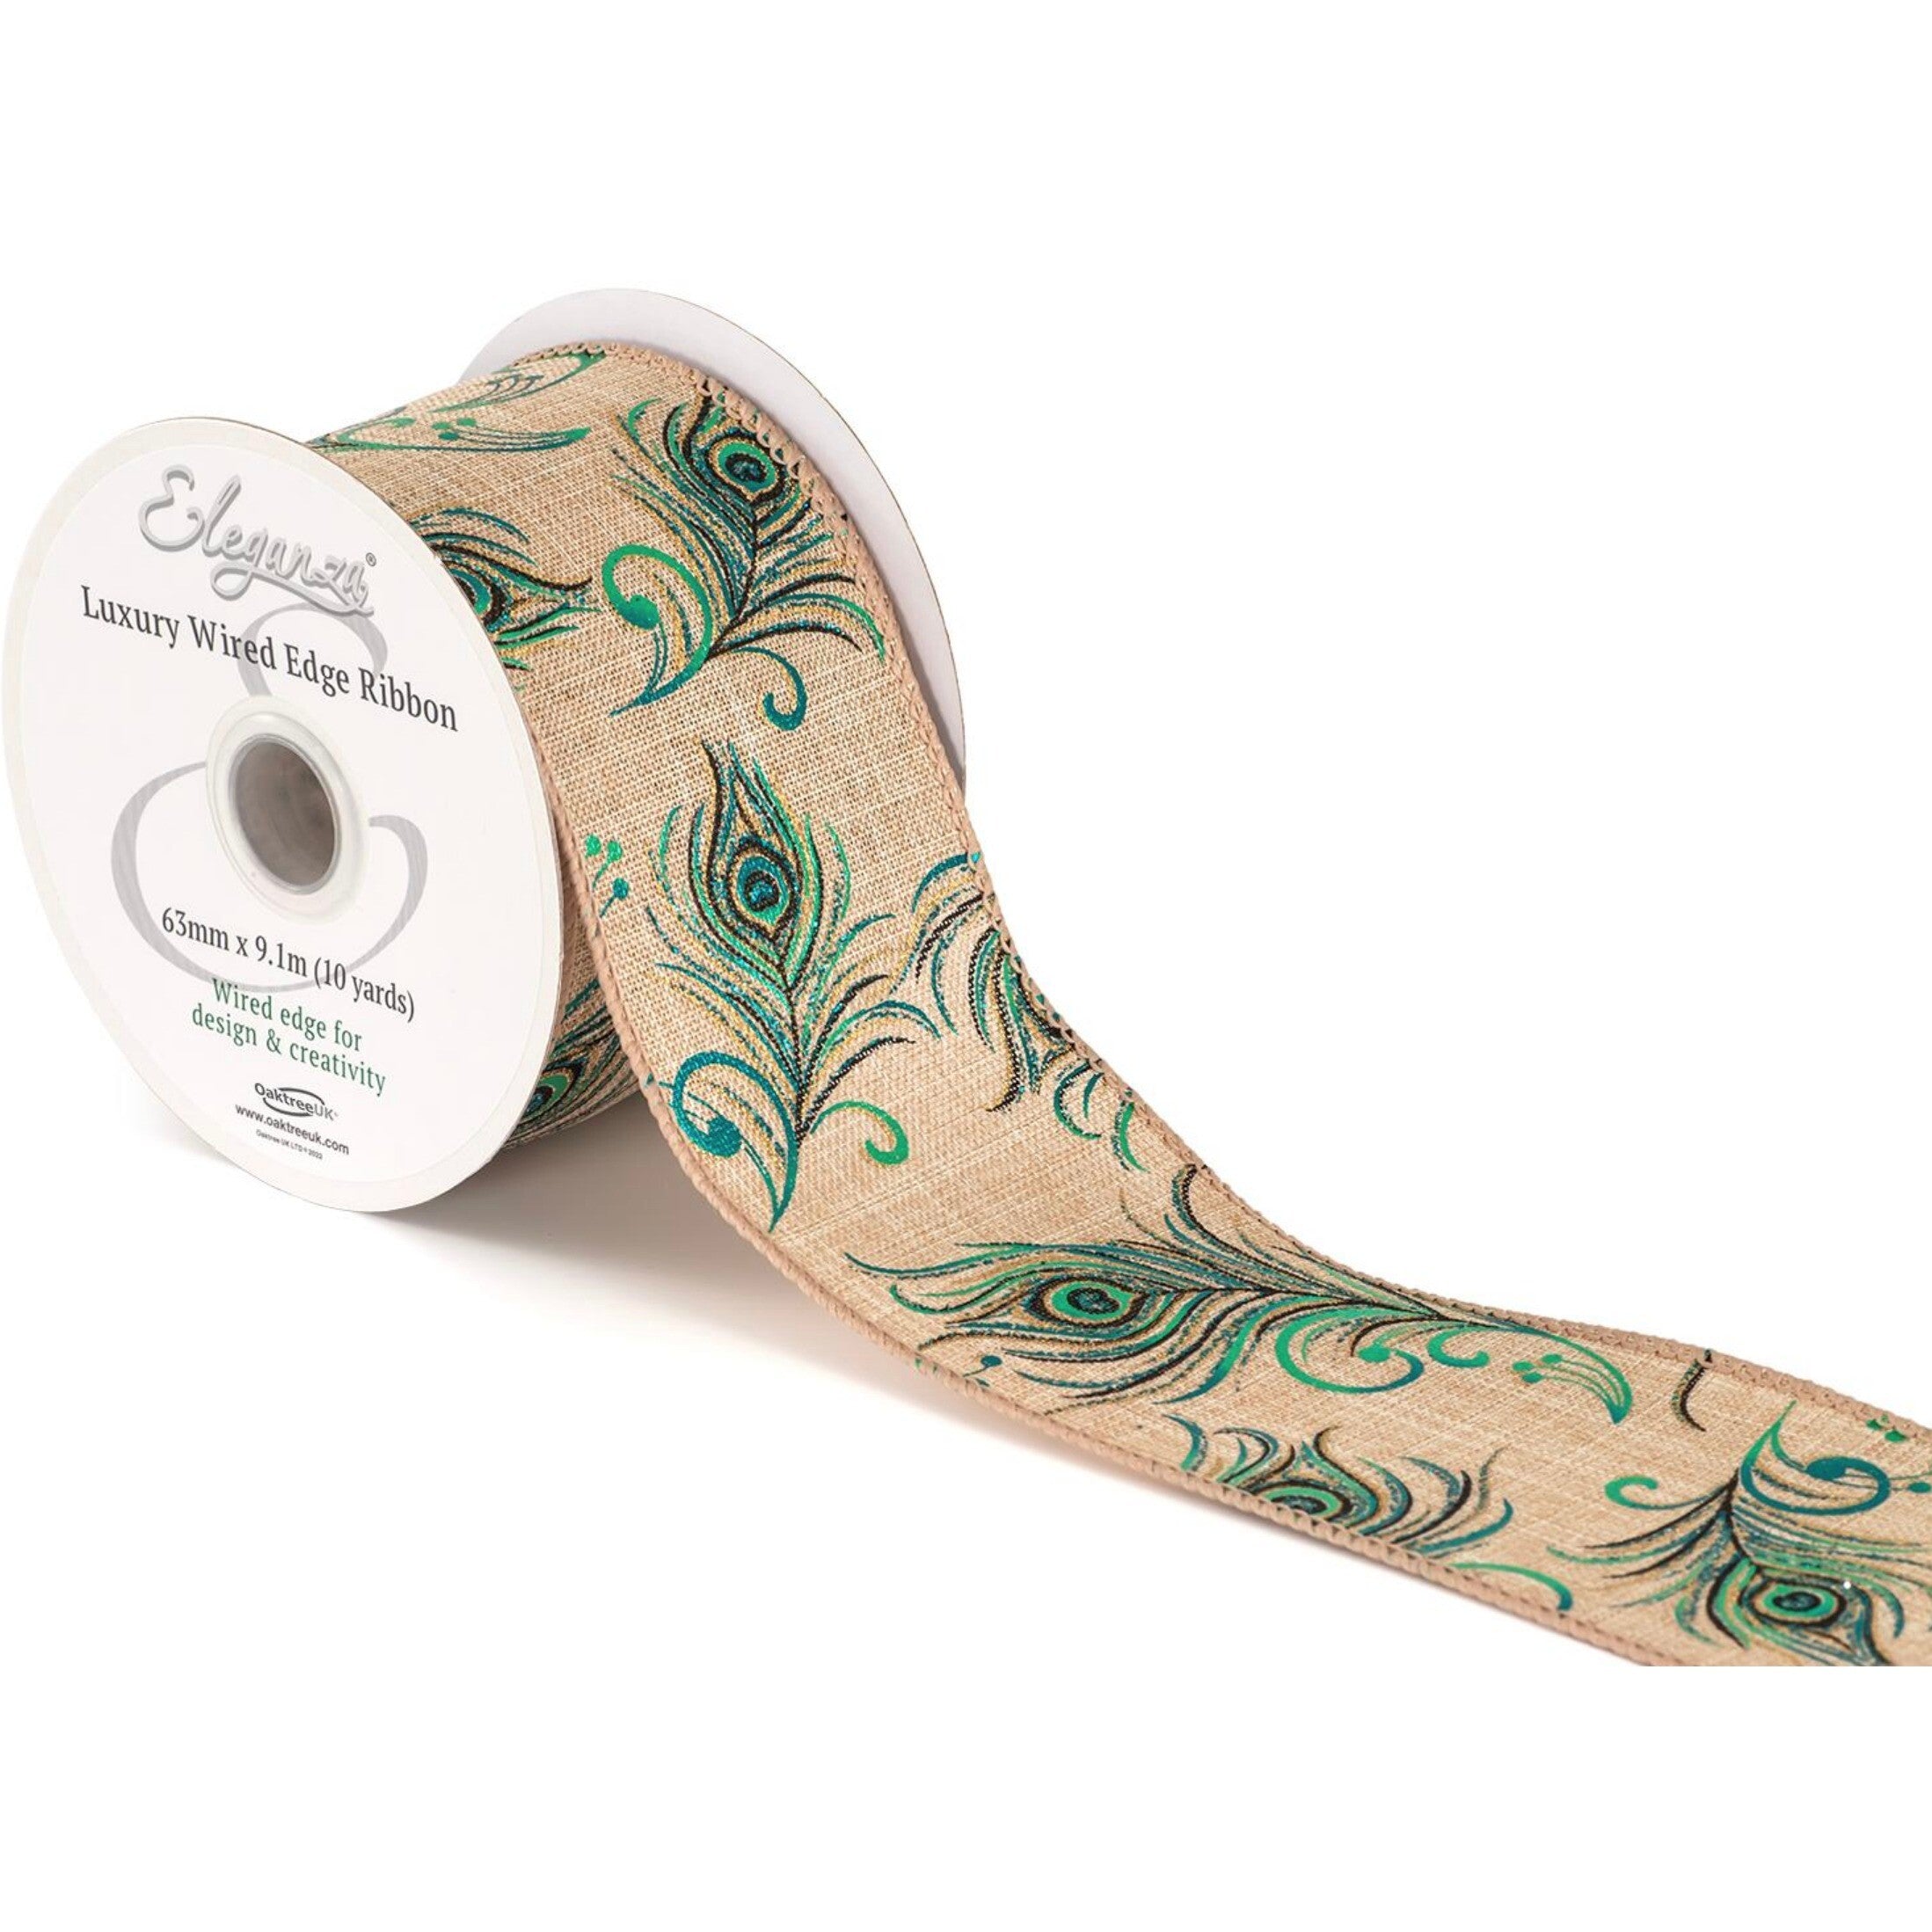 Luxury Wired Ribbon: Iridescent Peacock - 63mm